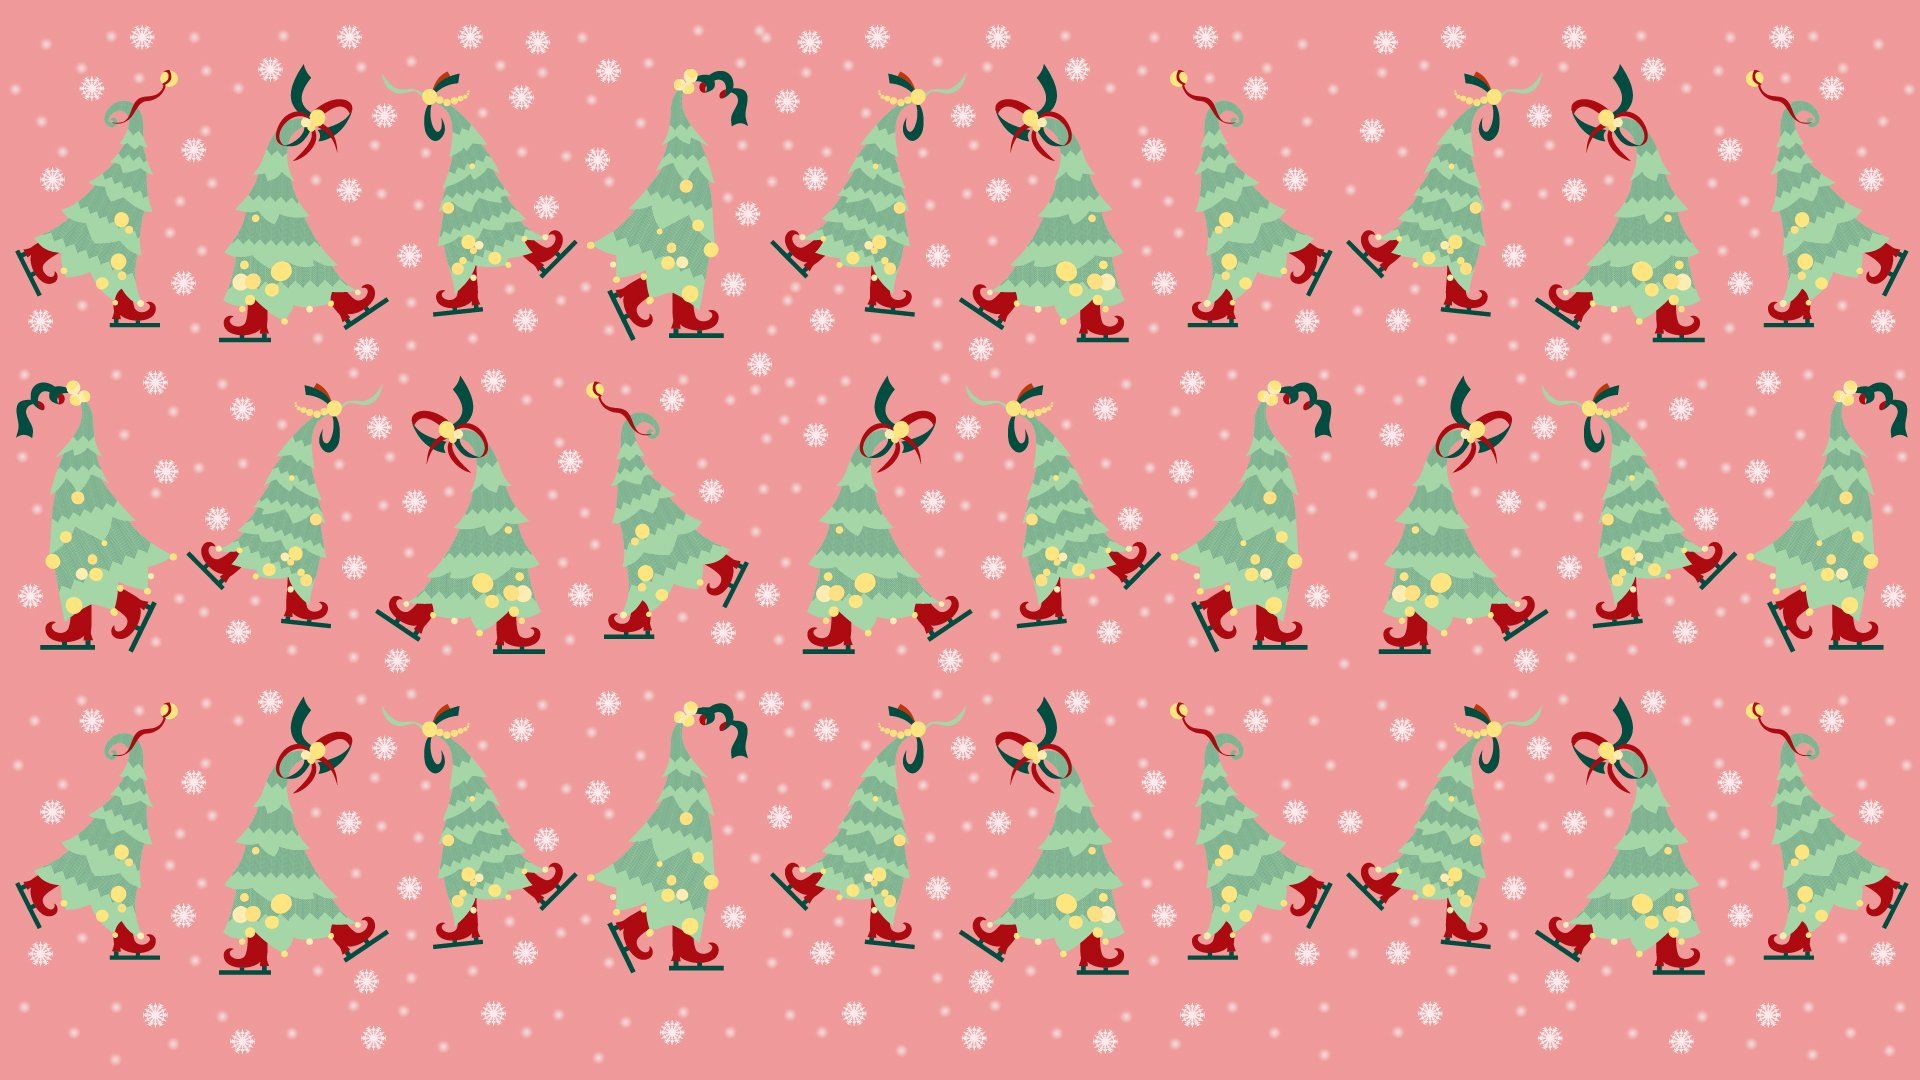 Aesthetic Christmas Collage Desktop Wallpapers in 2022  Christmas collage  Christmas wallp  Christmas wallpaper ipad Christmas desktop wallpaper Xmas  wallpaper